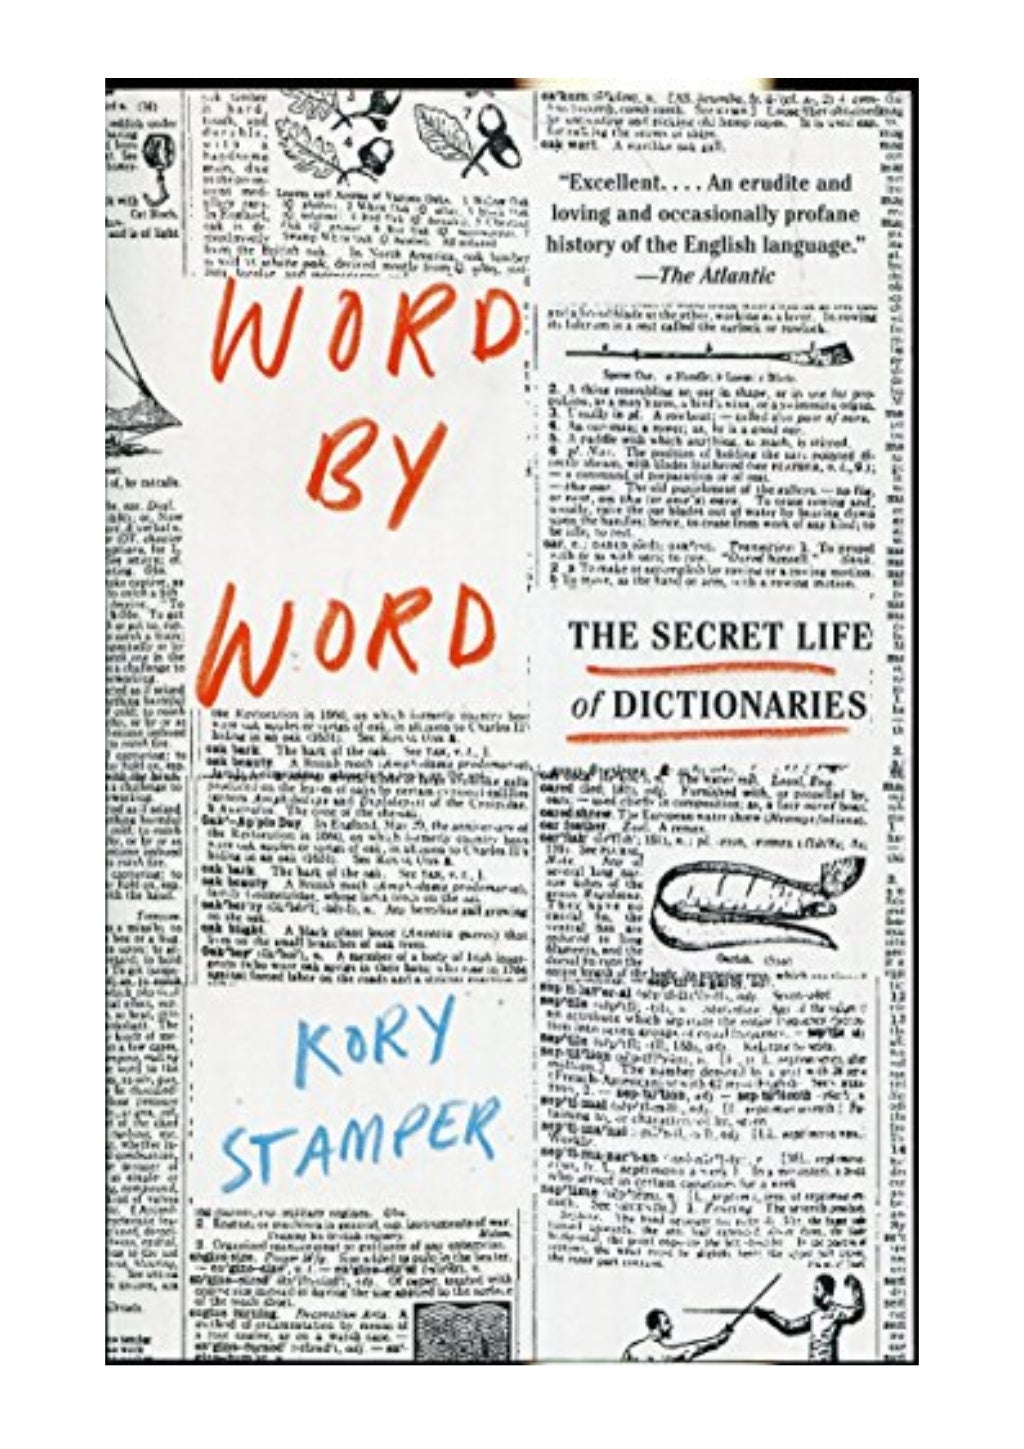 Word by Word PDF - Kory Stamper The Secret Life of Dictionaries